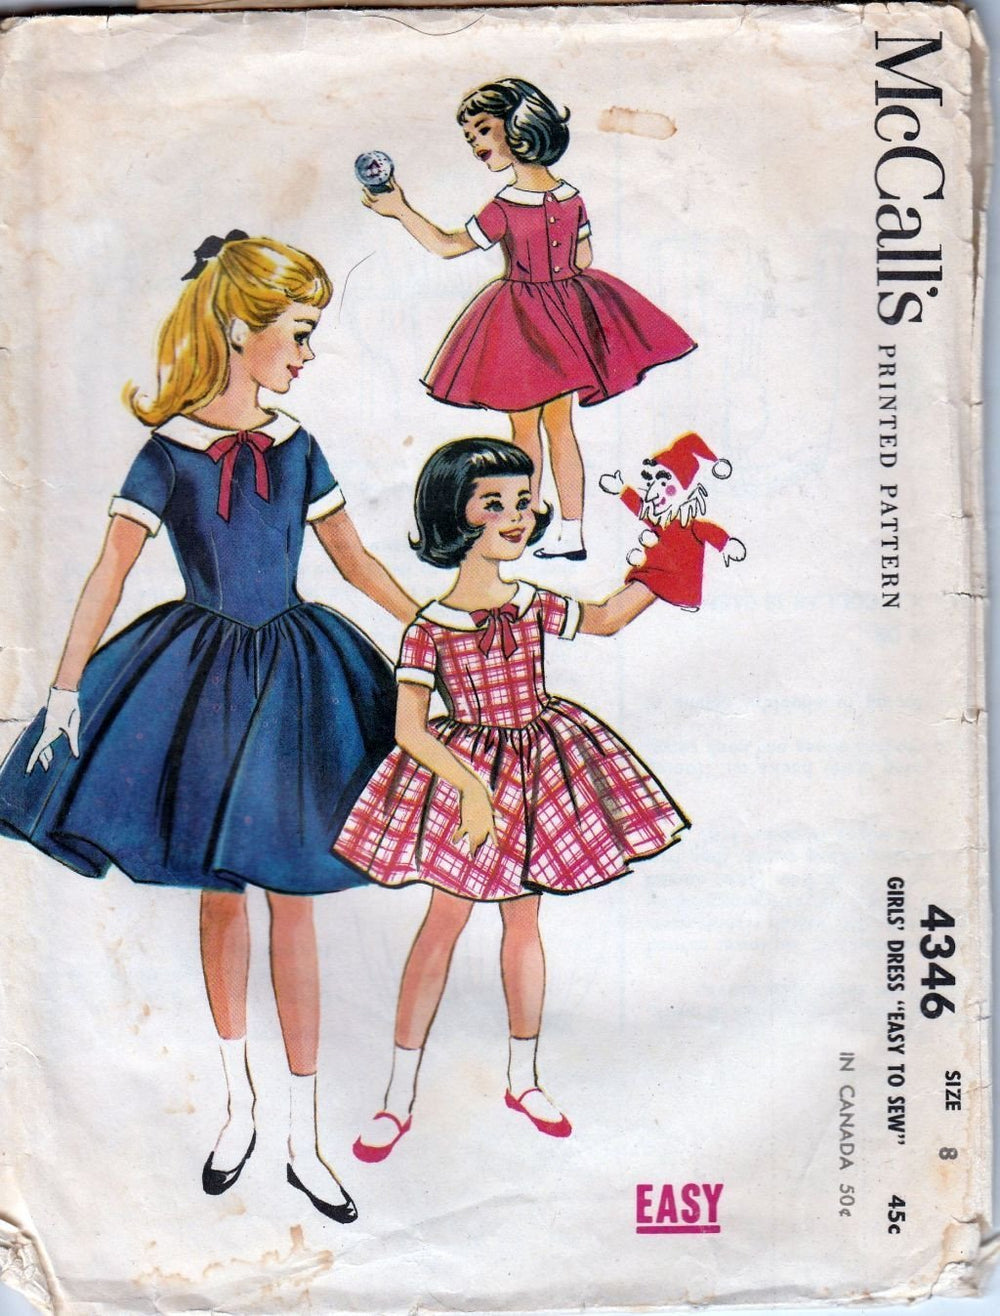 McCall's 4346 Vintage 1950's Sewing Pattern Young Girls Rockabilly Dress - VintageStitching - Vintage Sewing Patterns